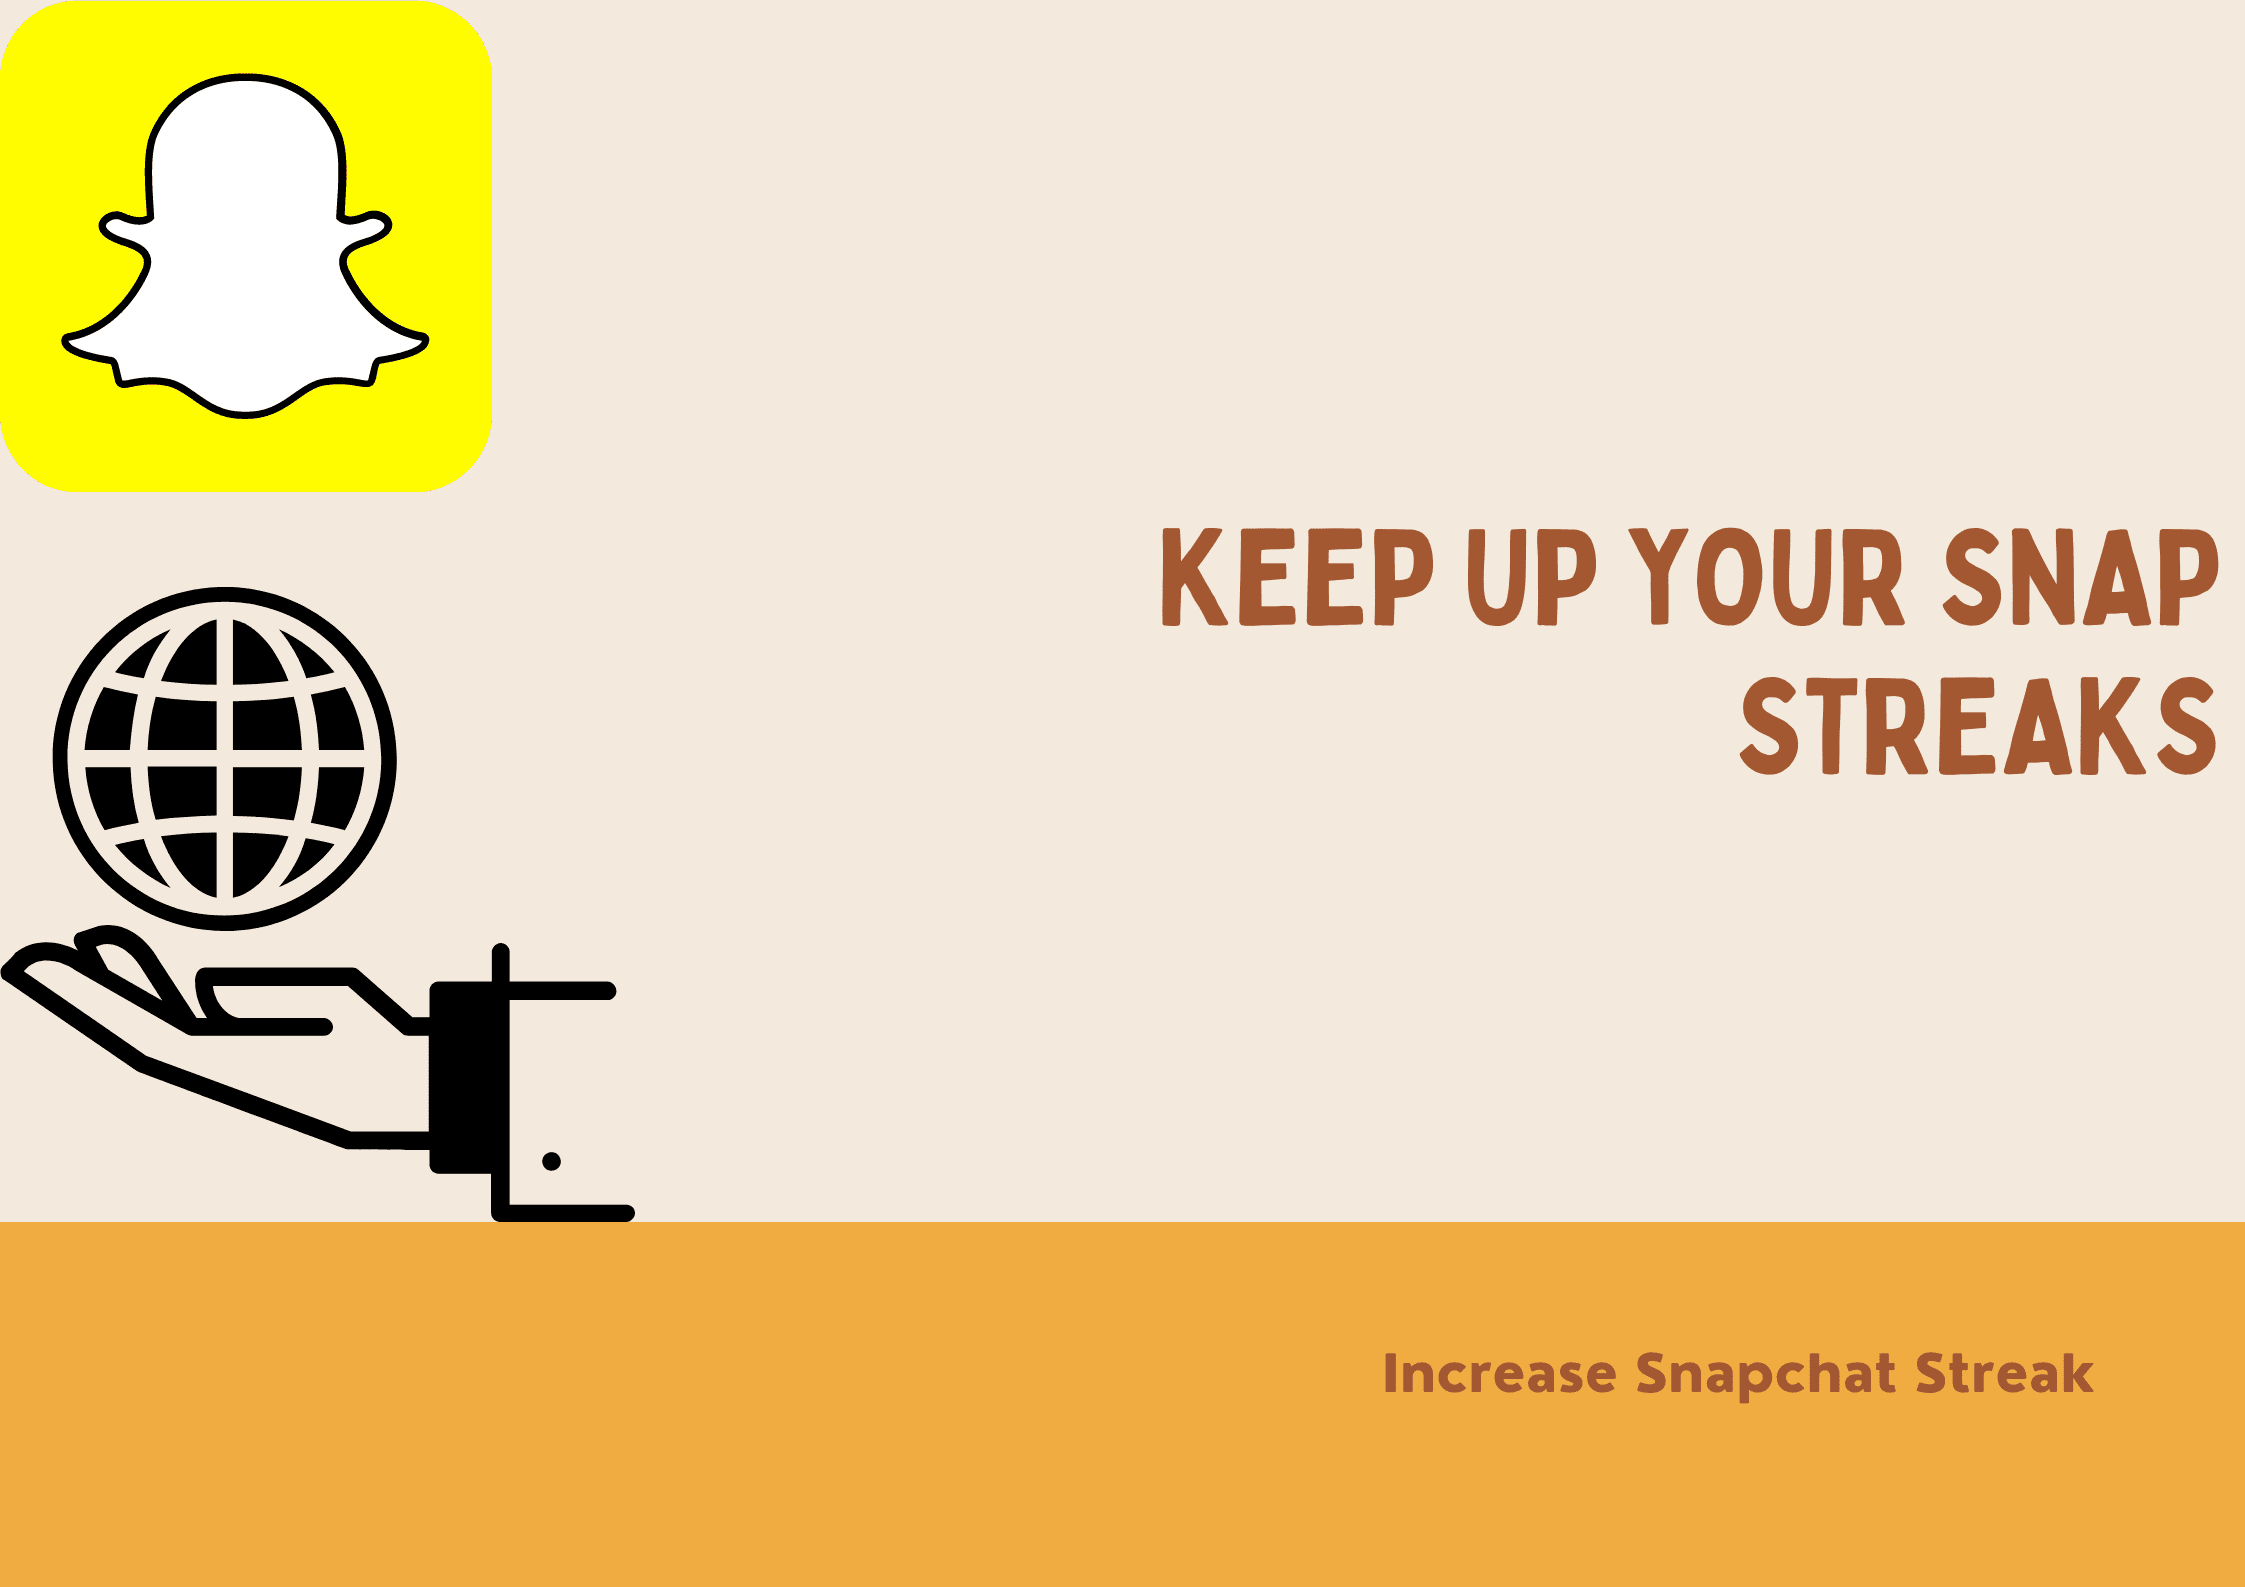  Keep up your snap streaks